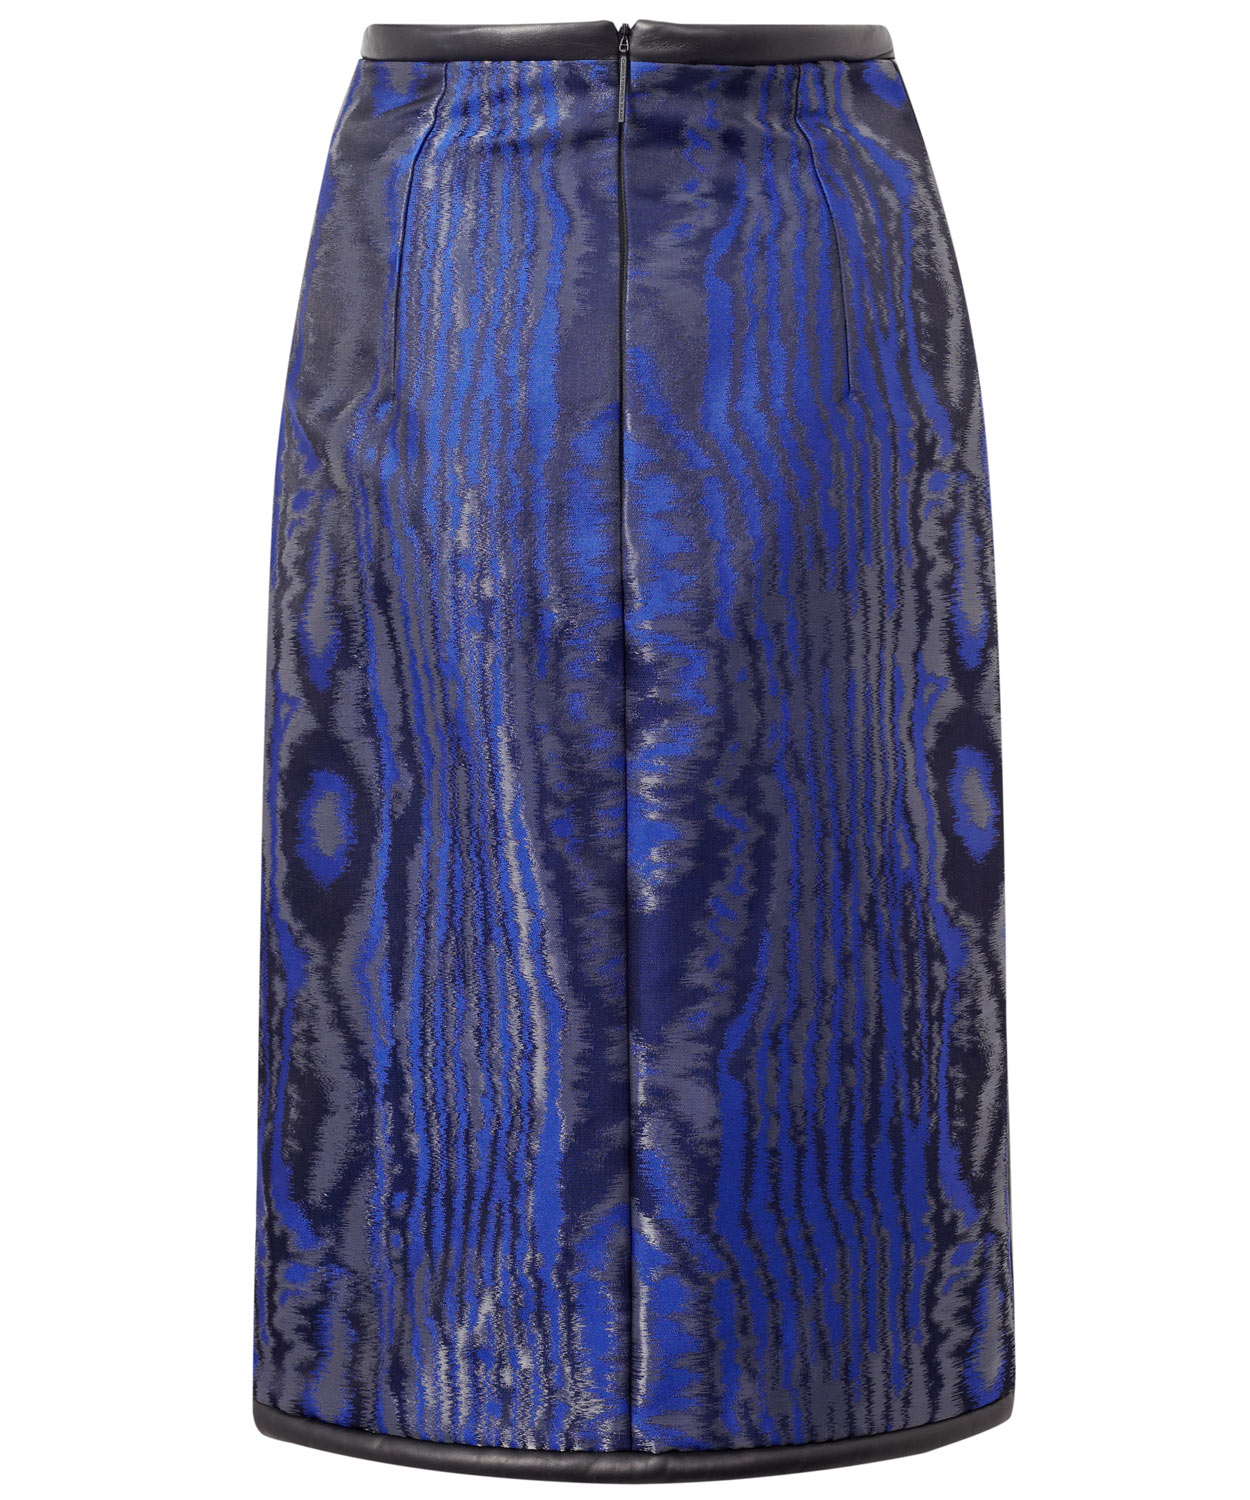 Lyst - Christopher Kane Moiré Effect Pencil Skirt in A Blue and Black ...